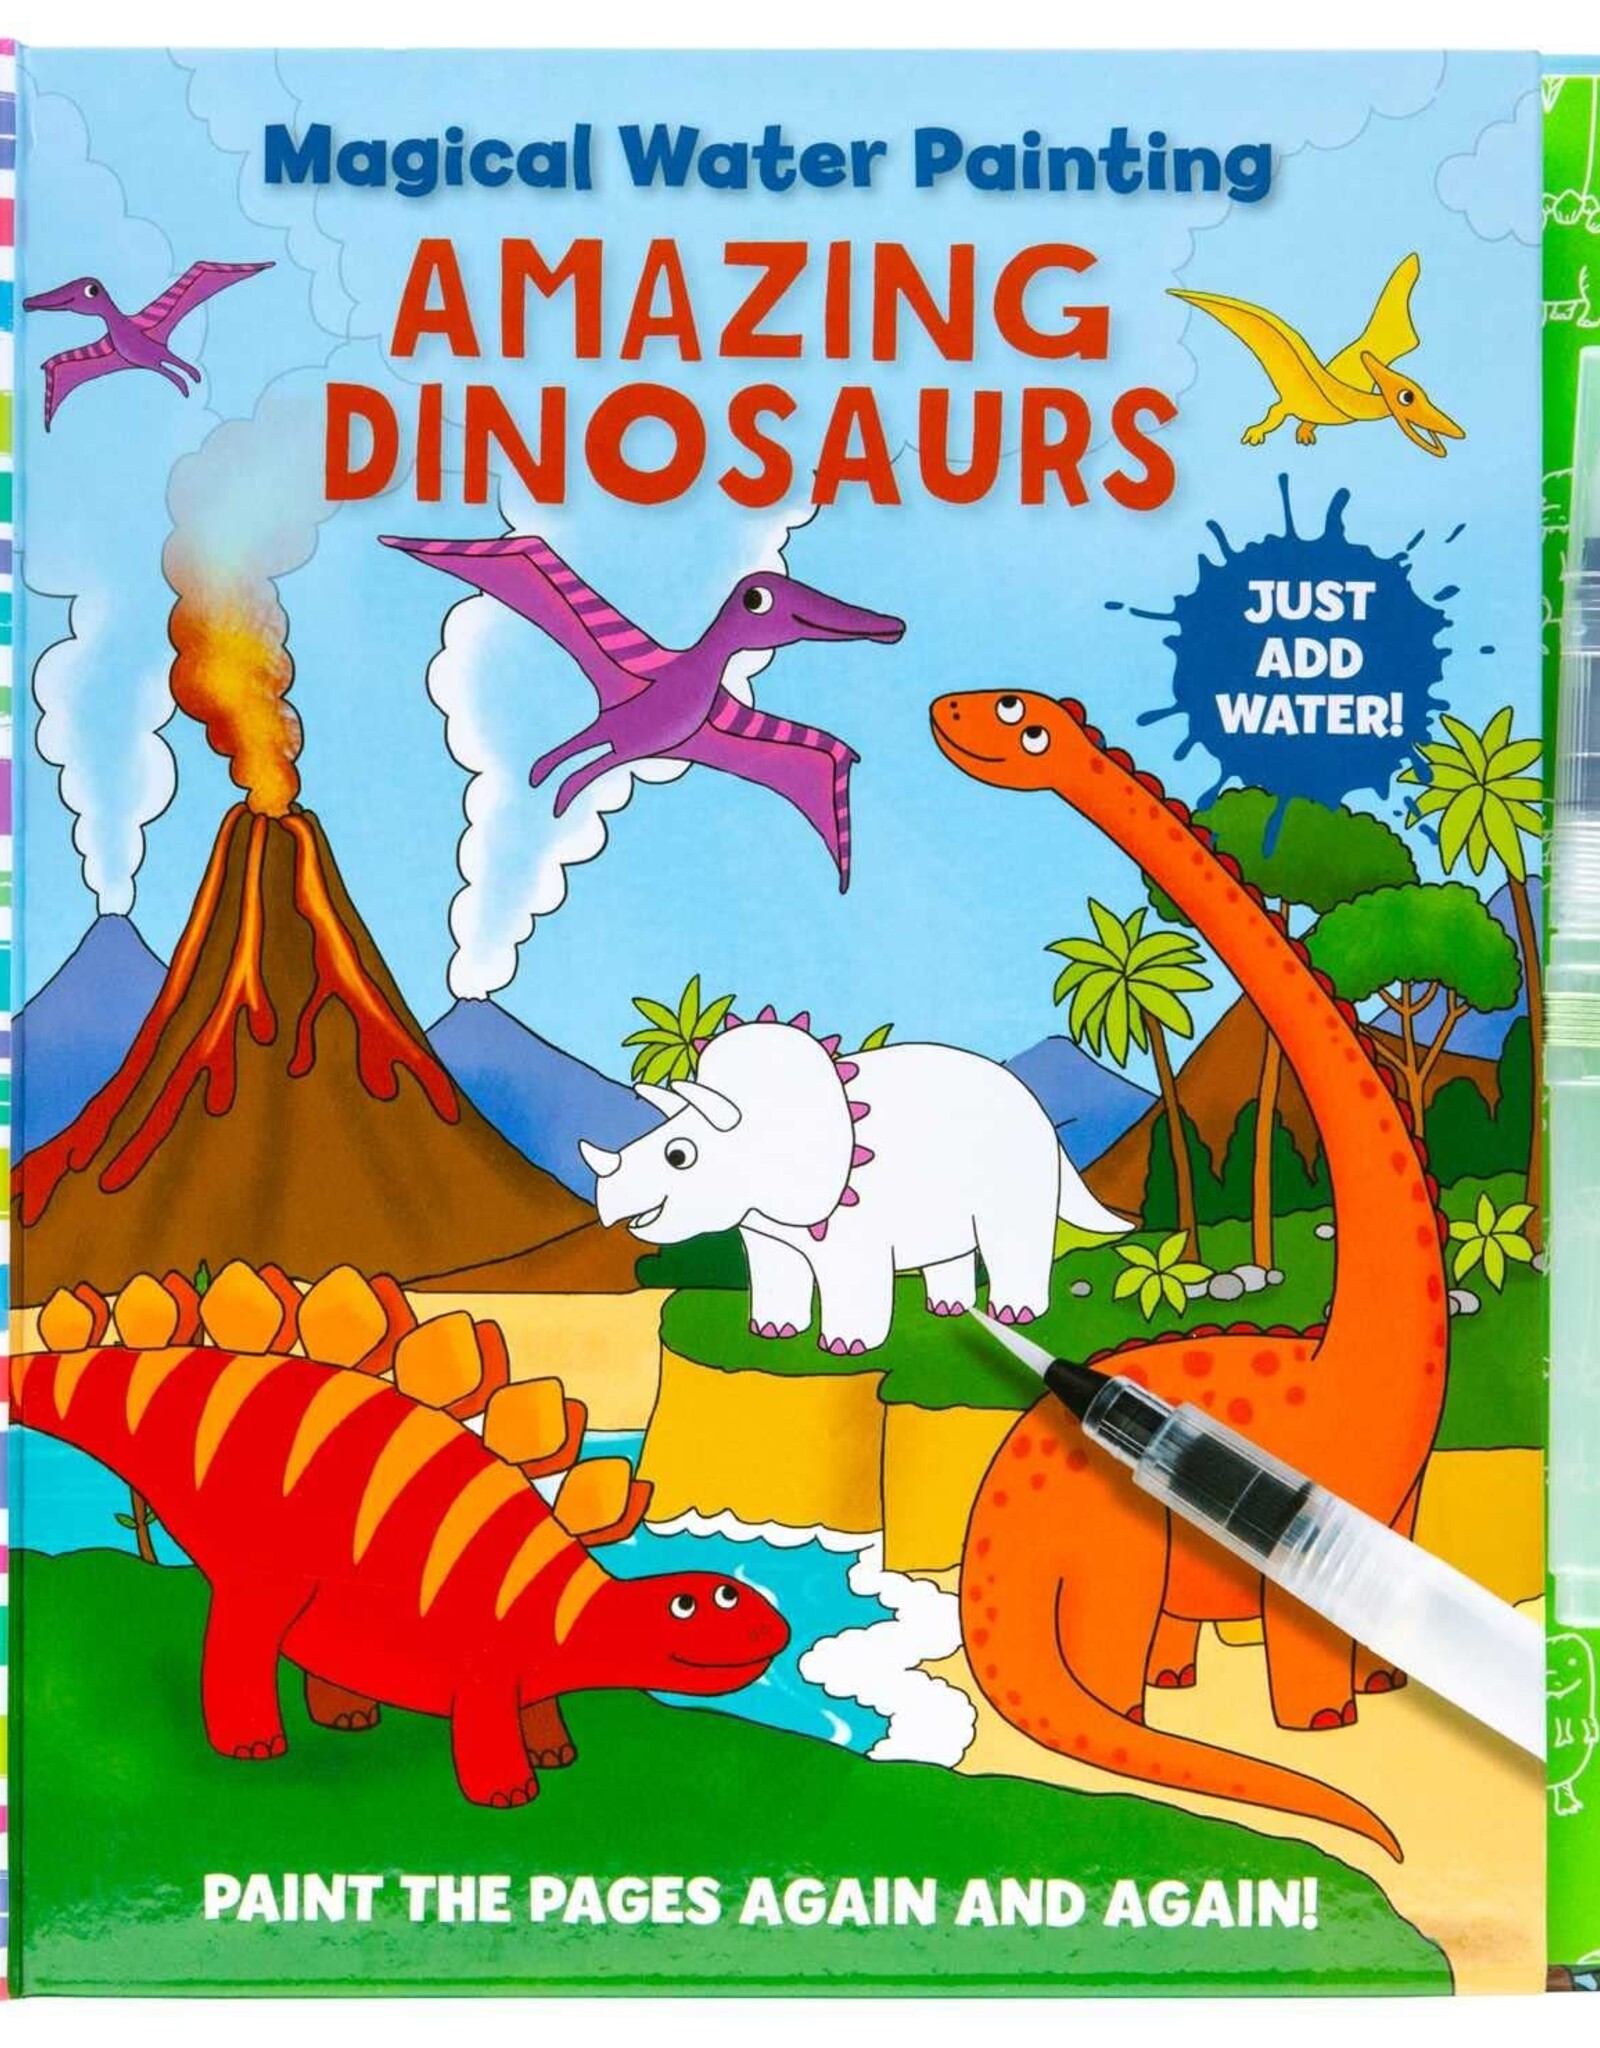 Magical Water Painting: Amazing Dinosaurs